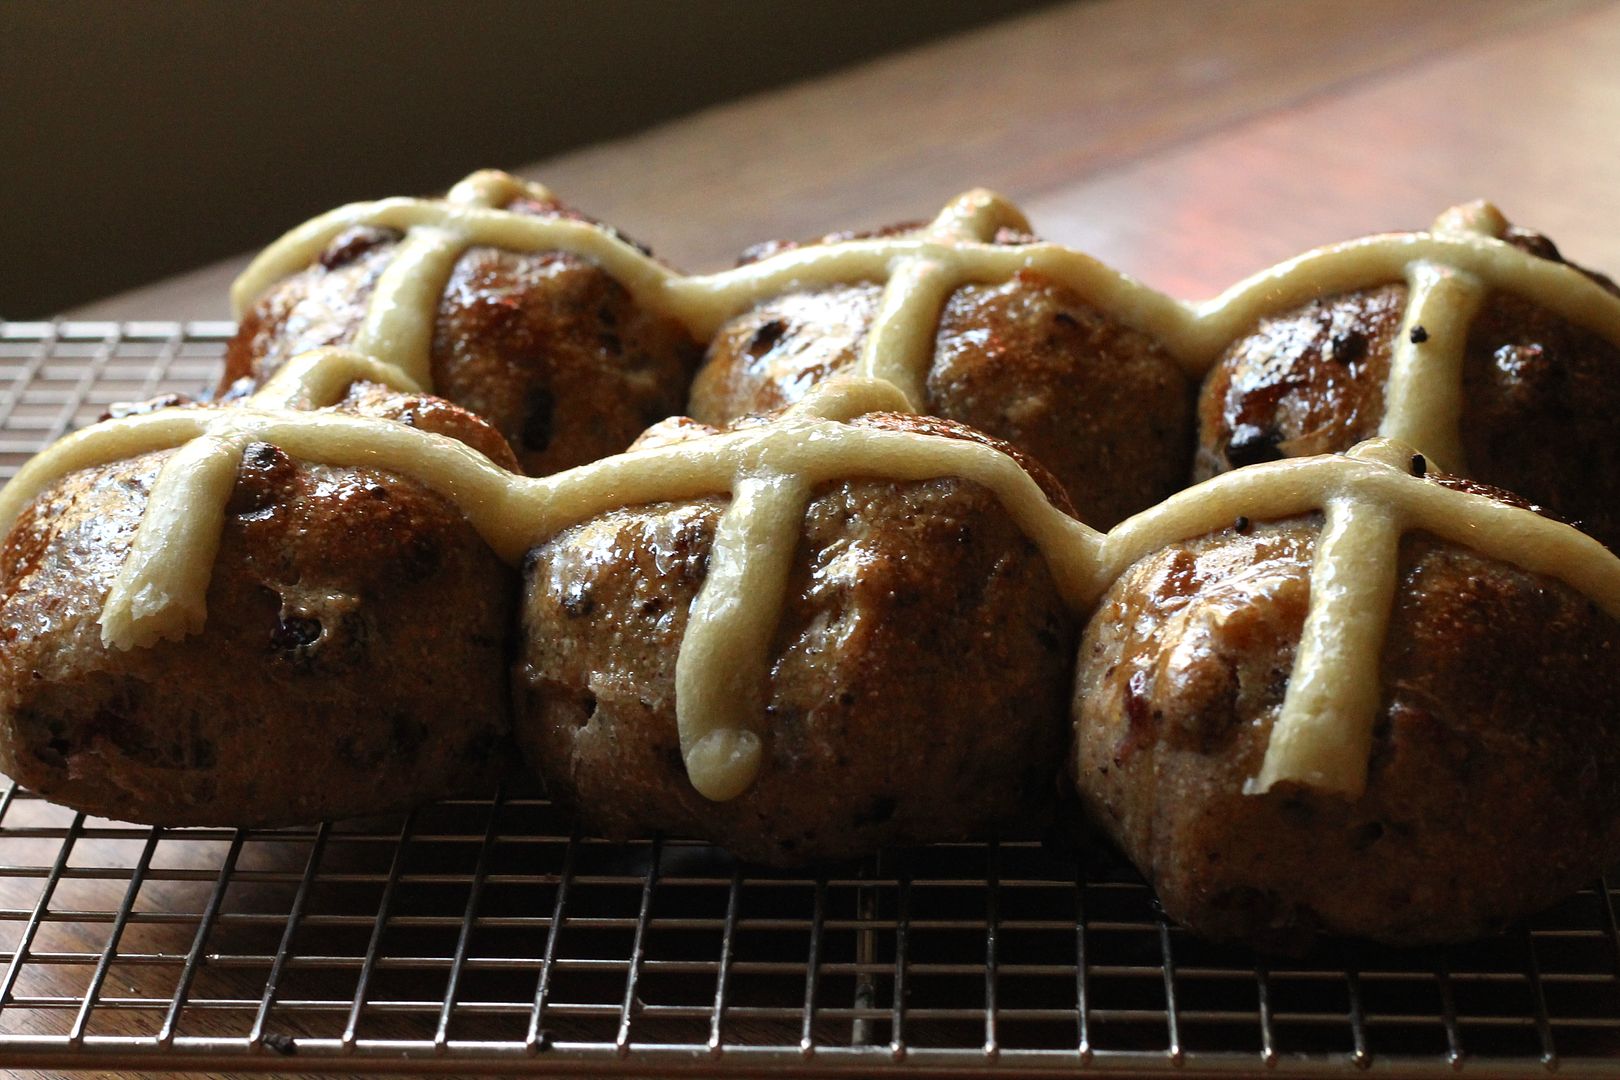 Sourdough Cider Hot Cross Buns with Chocolate Chunks | Korena in the Kitchen